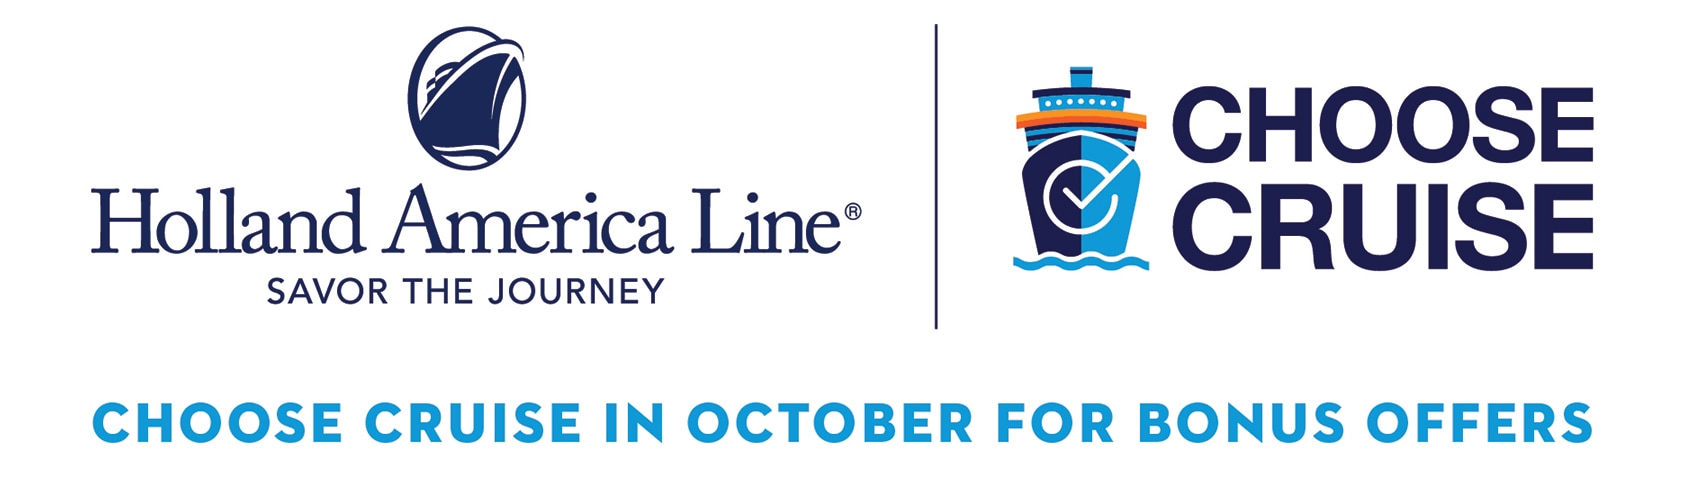 Holland America Line®: Savor the Journey | Choose Cruise | Choose Cruise in October for Bonus Offers